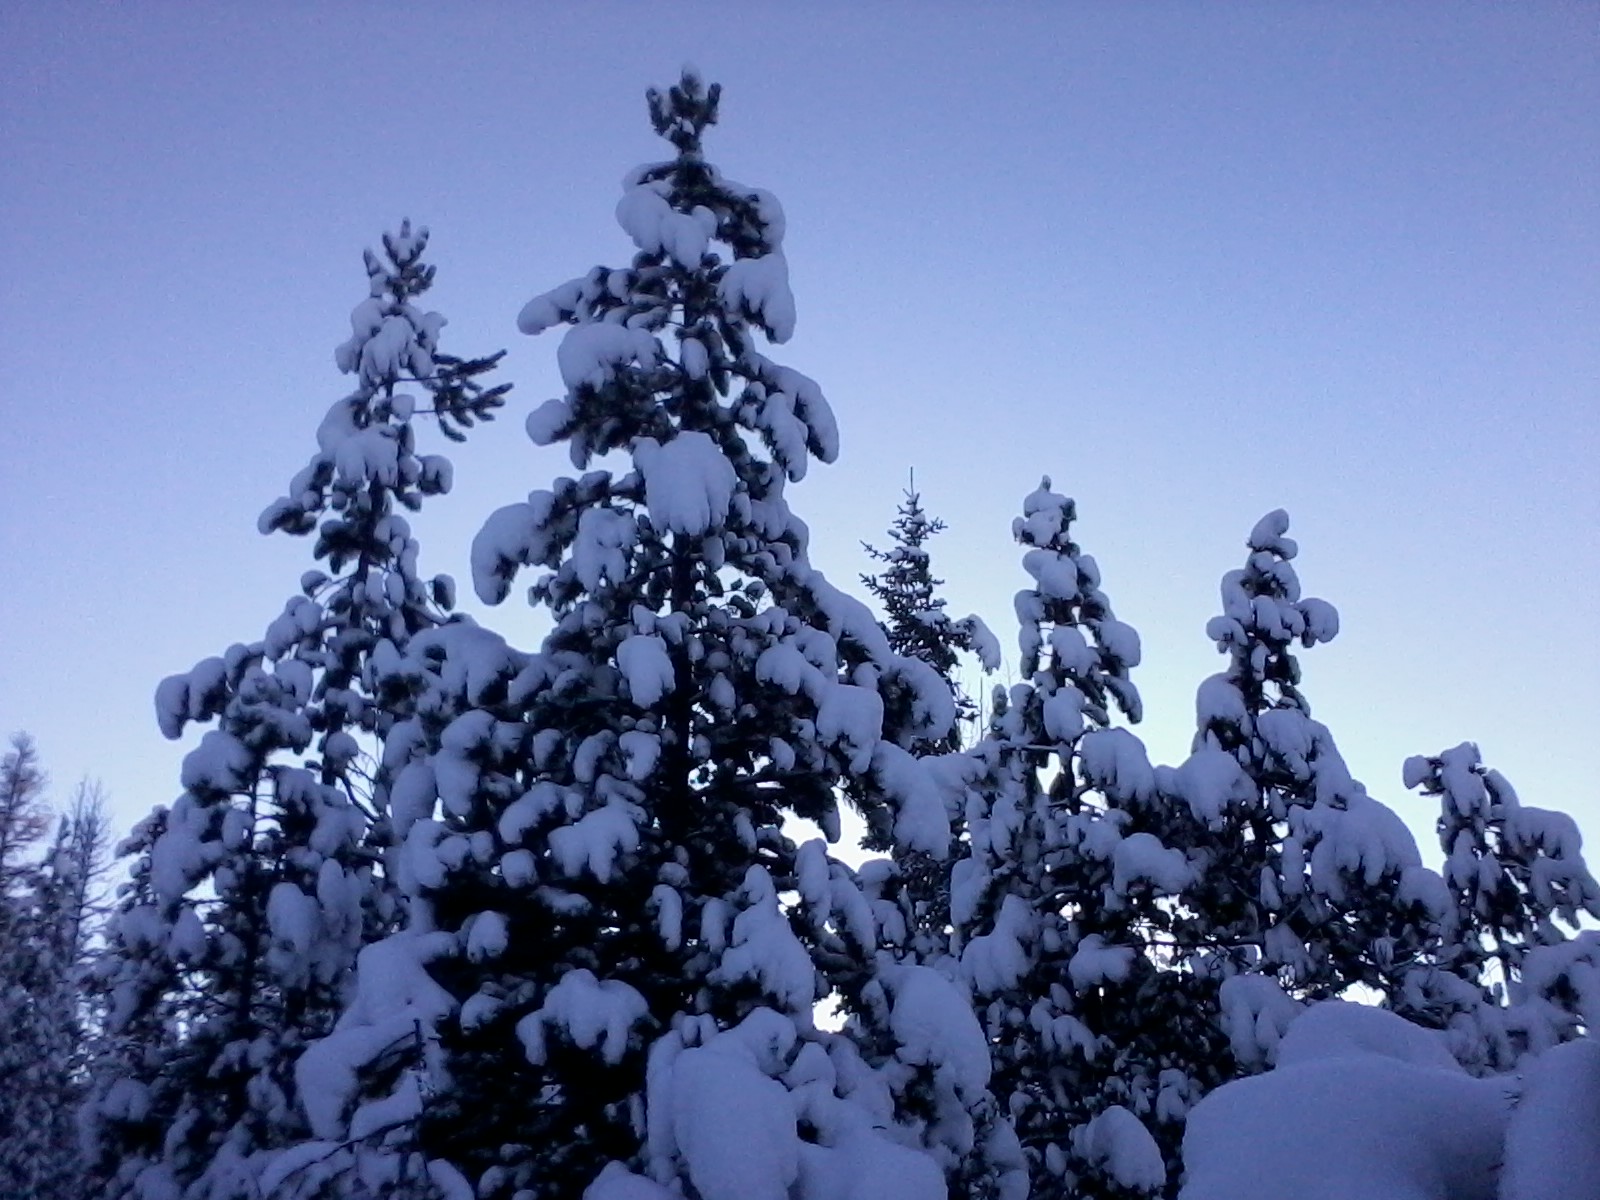 Spectacular winter scenery while snowshoeing at Dry Creek!